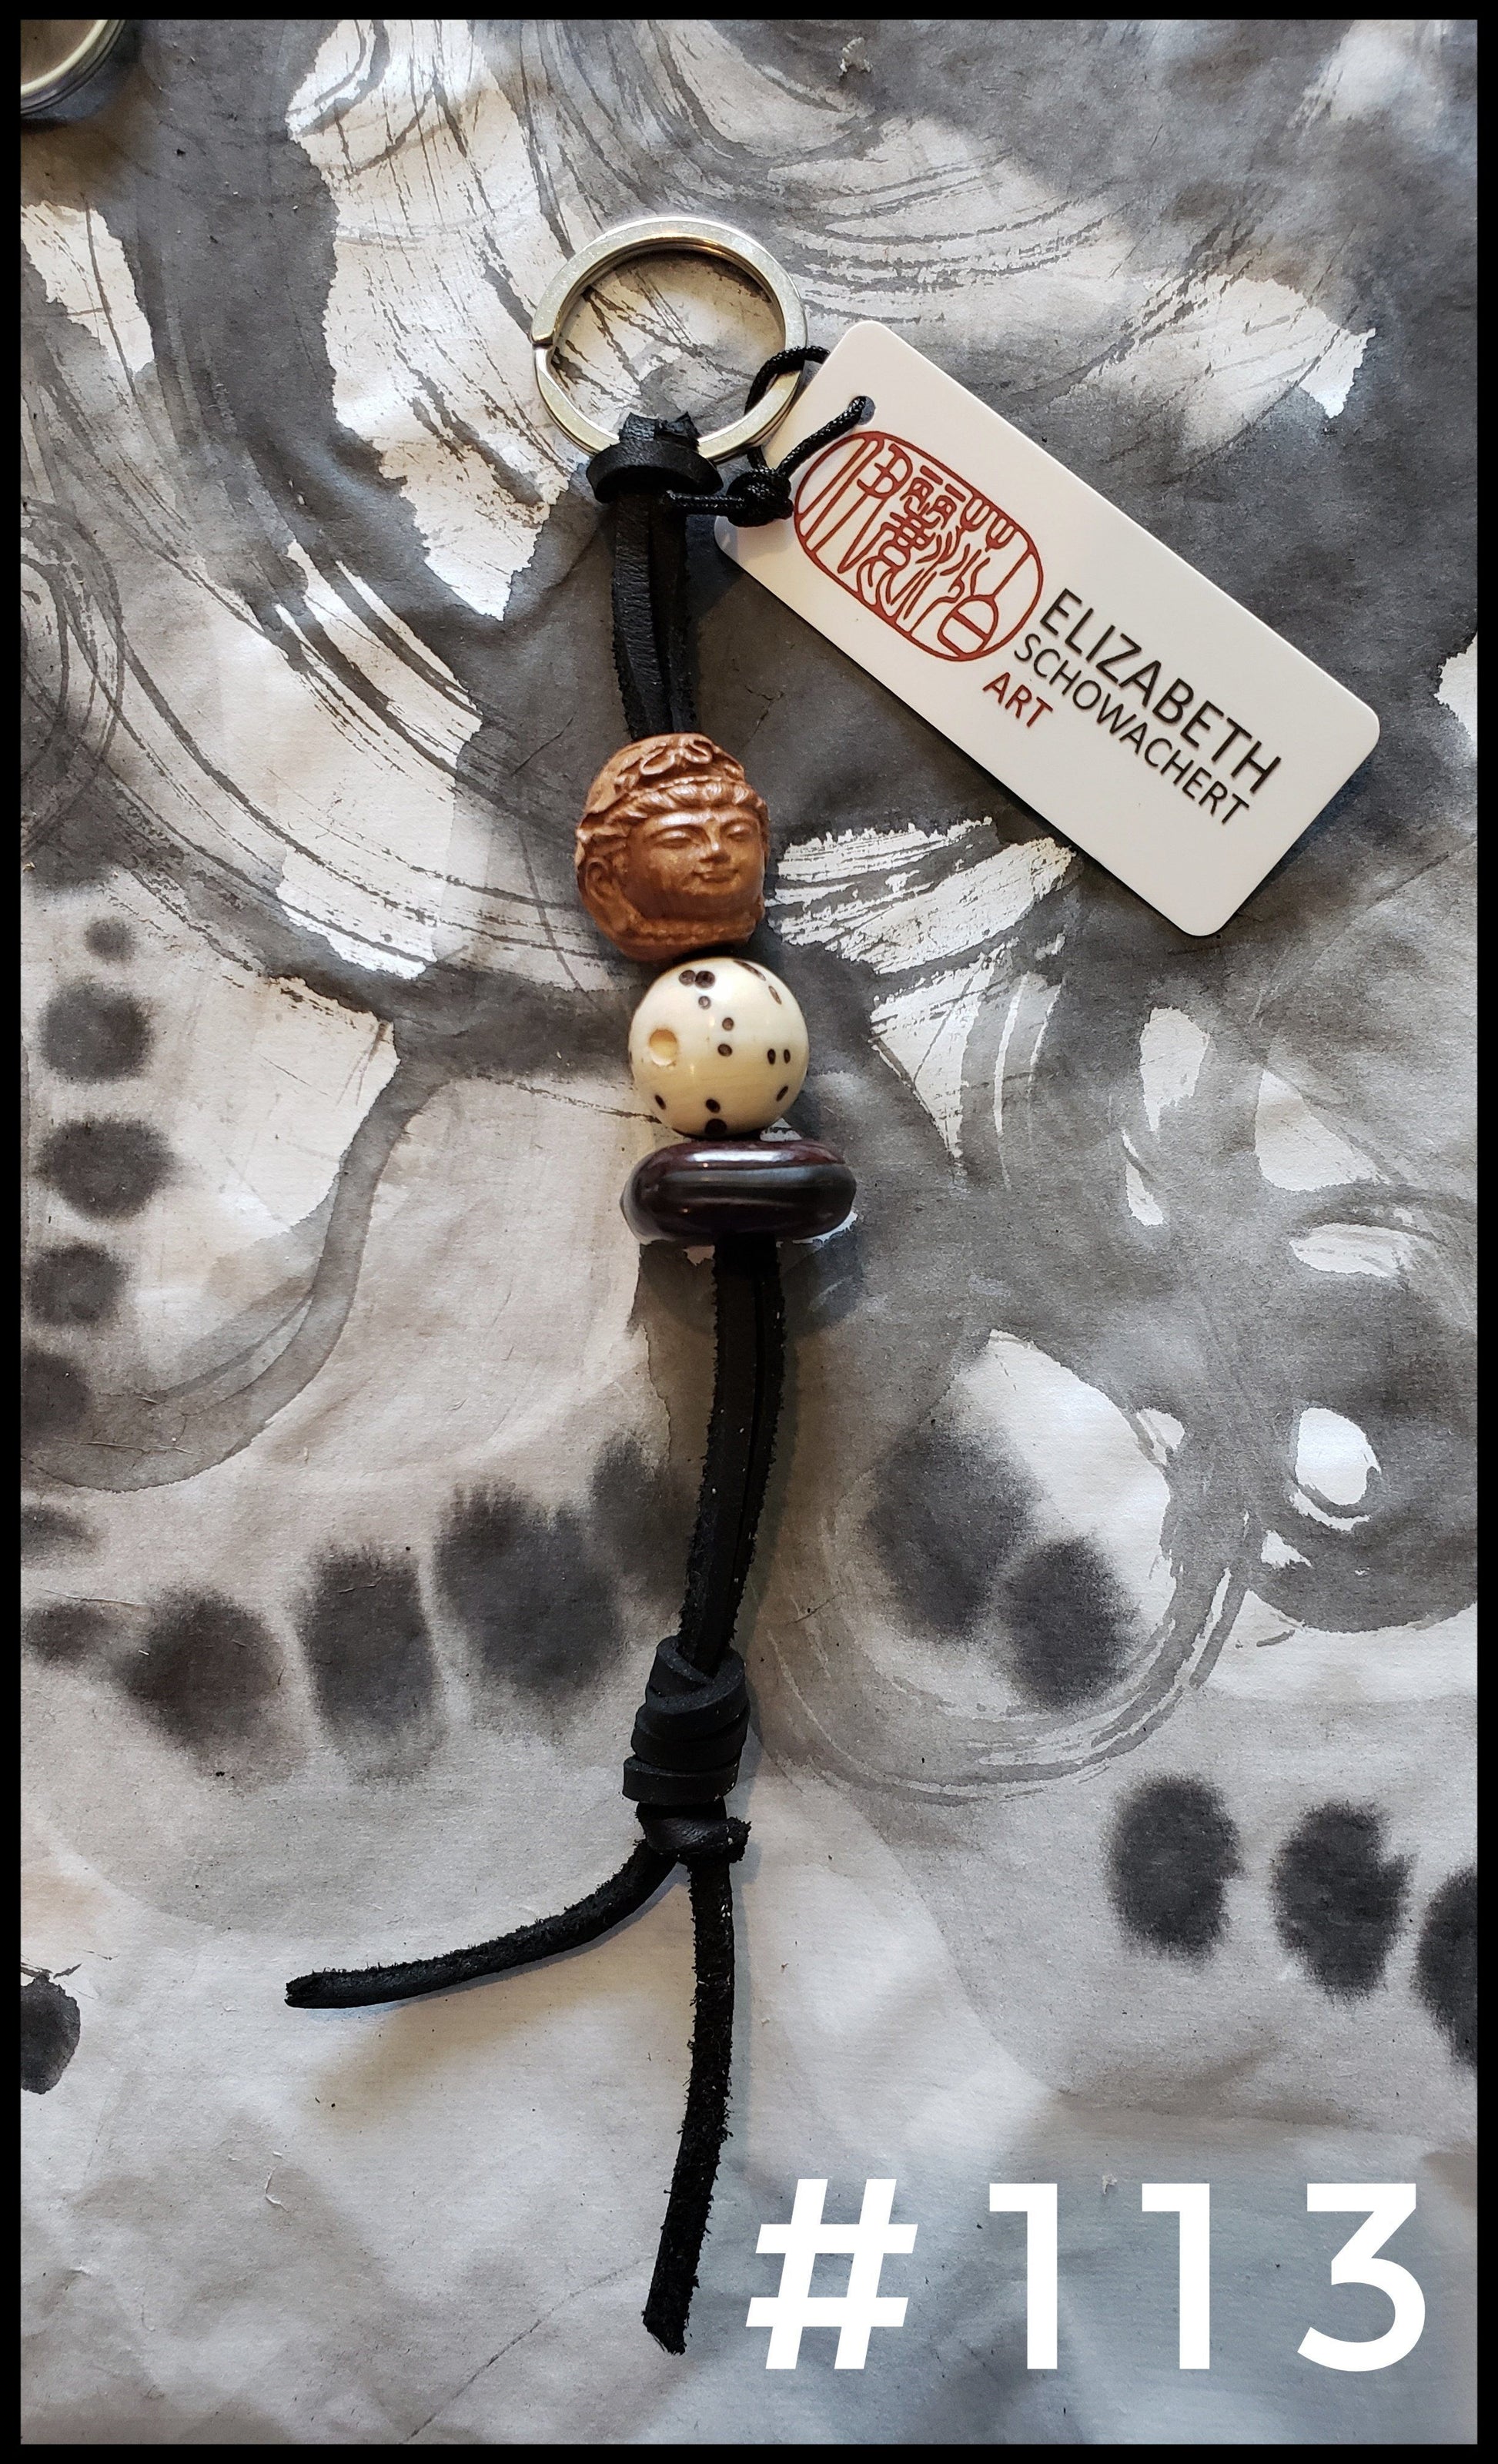 Leather Keychains Made With Bamboo and Natural Seeds - Elizabeth Schowachert Art